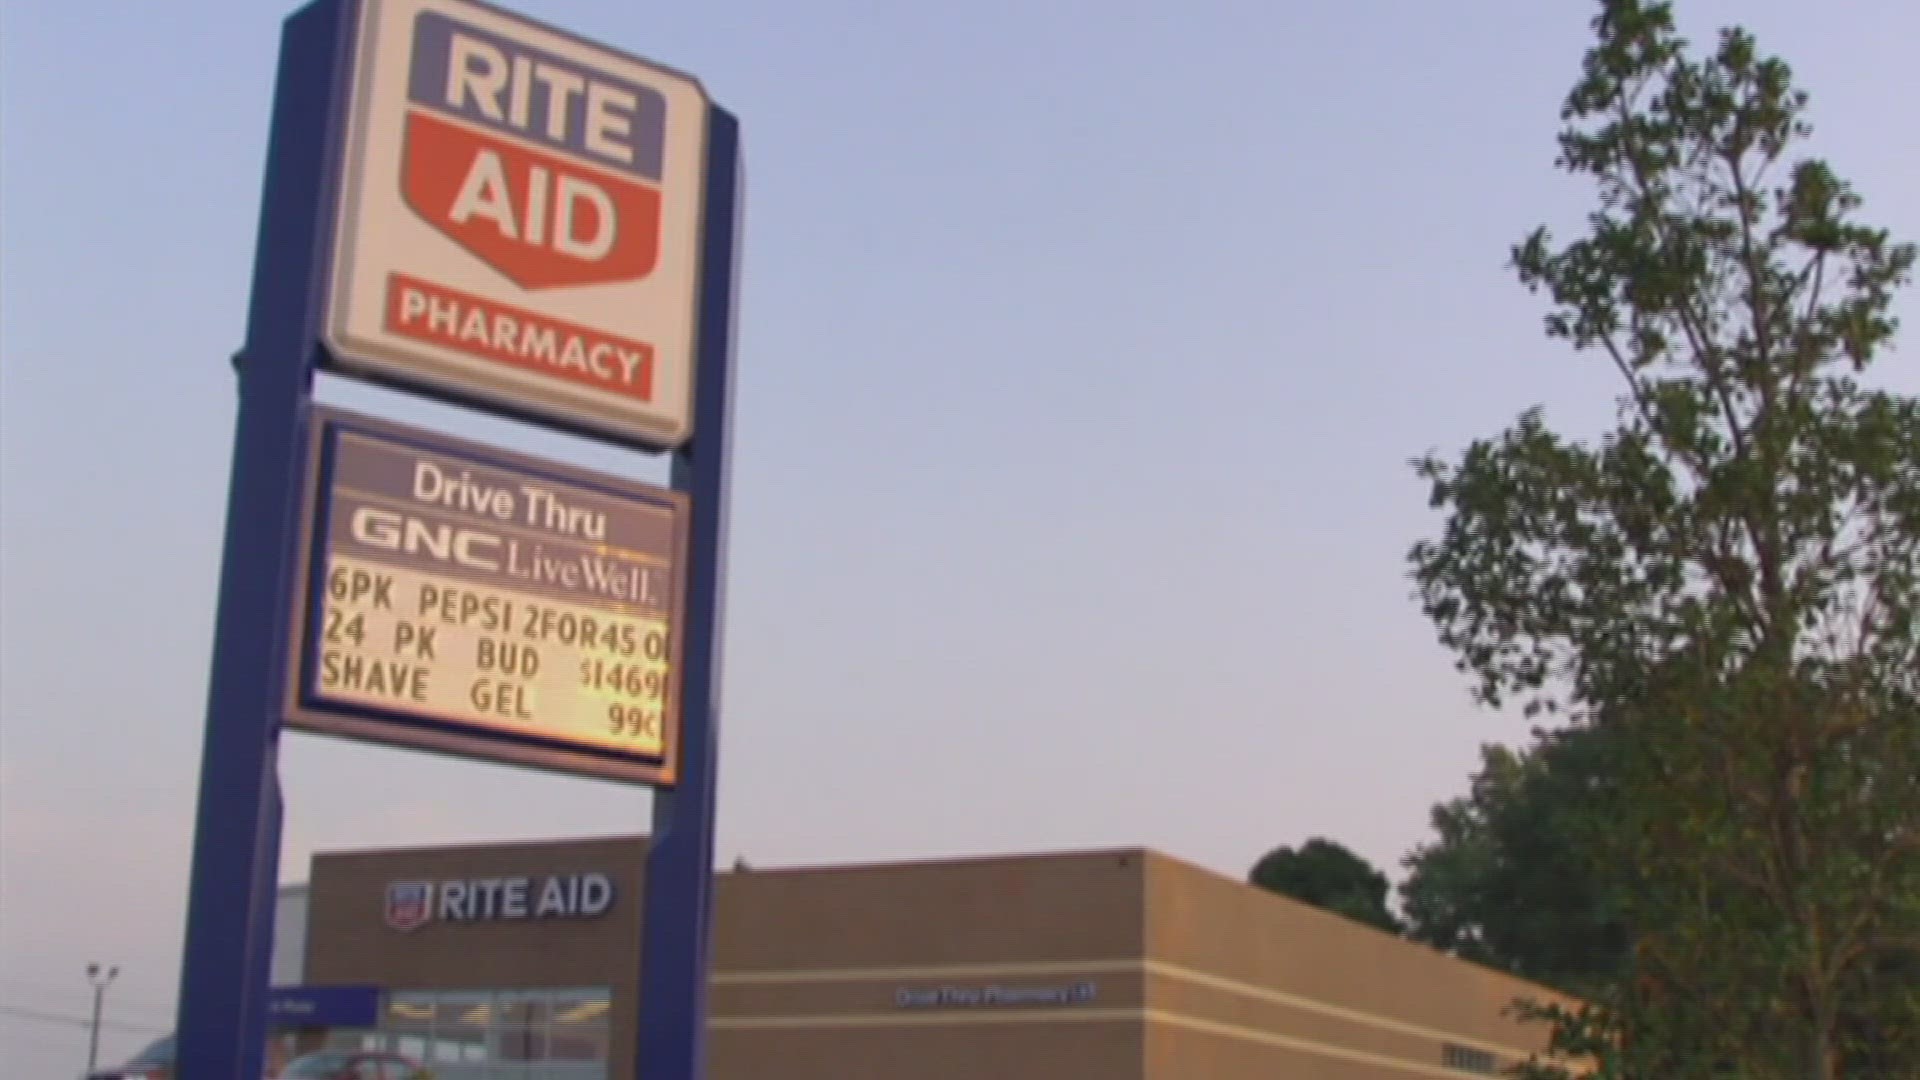 Rite Aid, which owns Bartell Drugs, filed for bankruptcy protection as it deals with losses and opioid-related lawsuits.